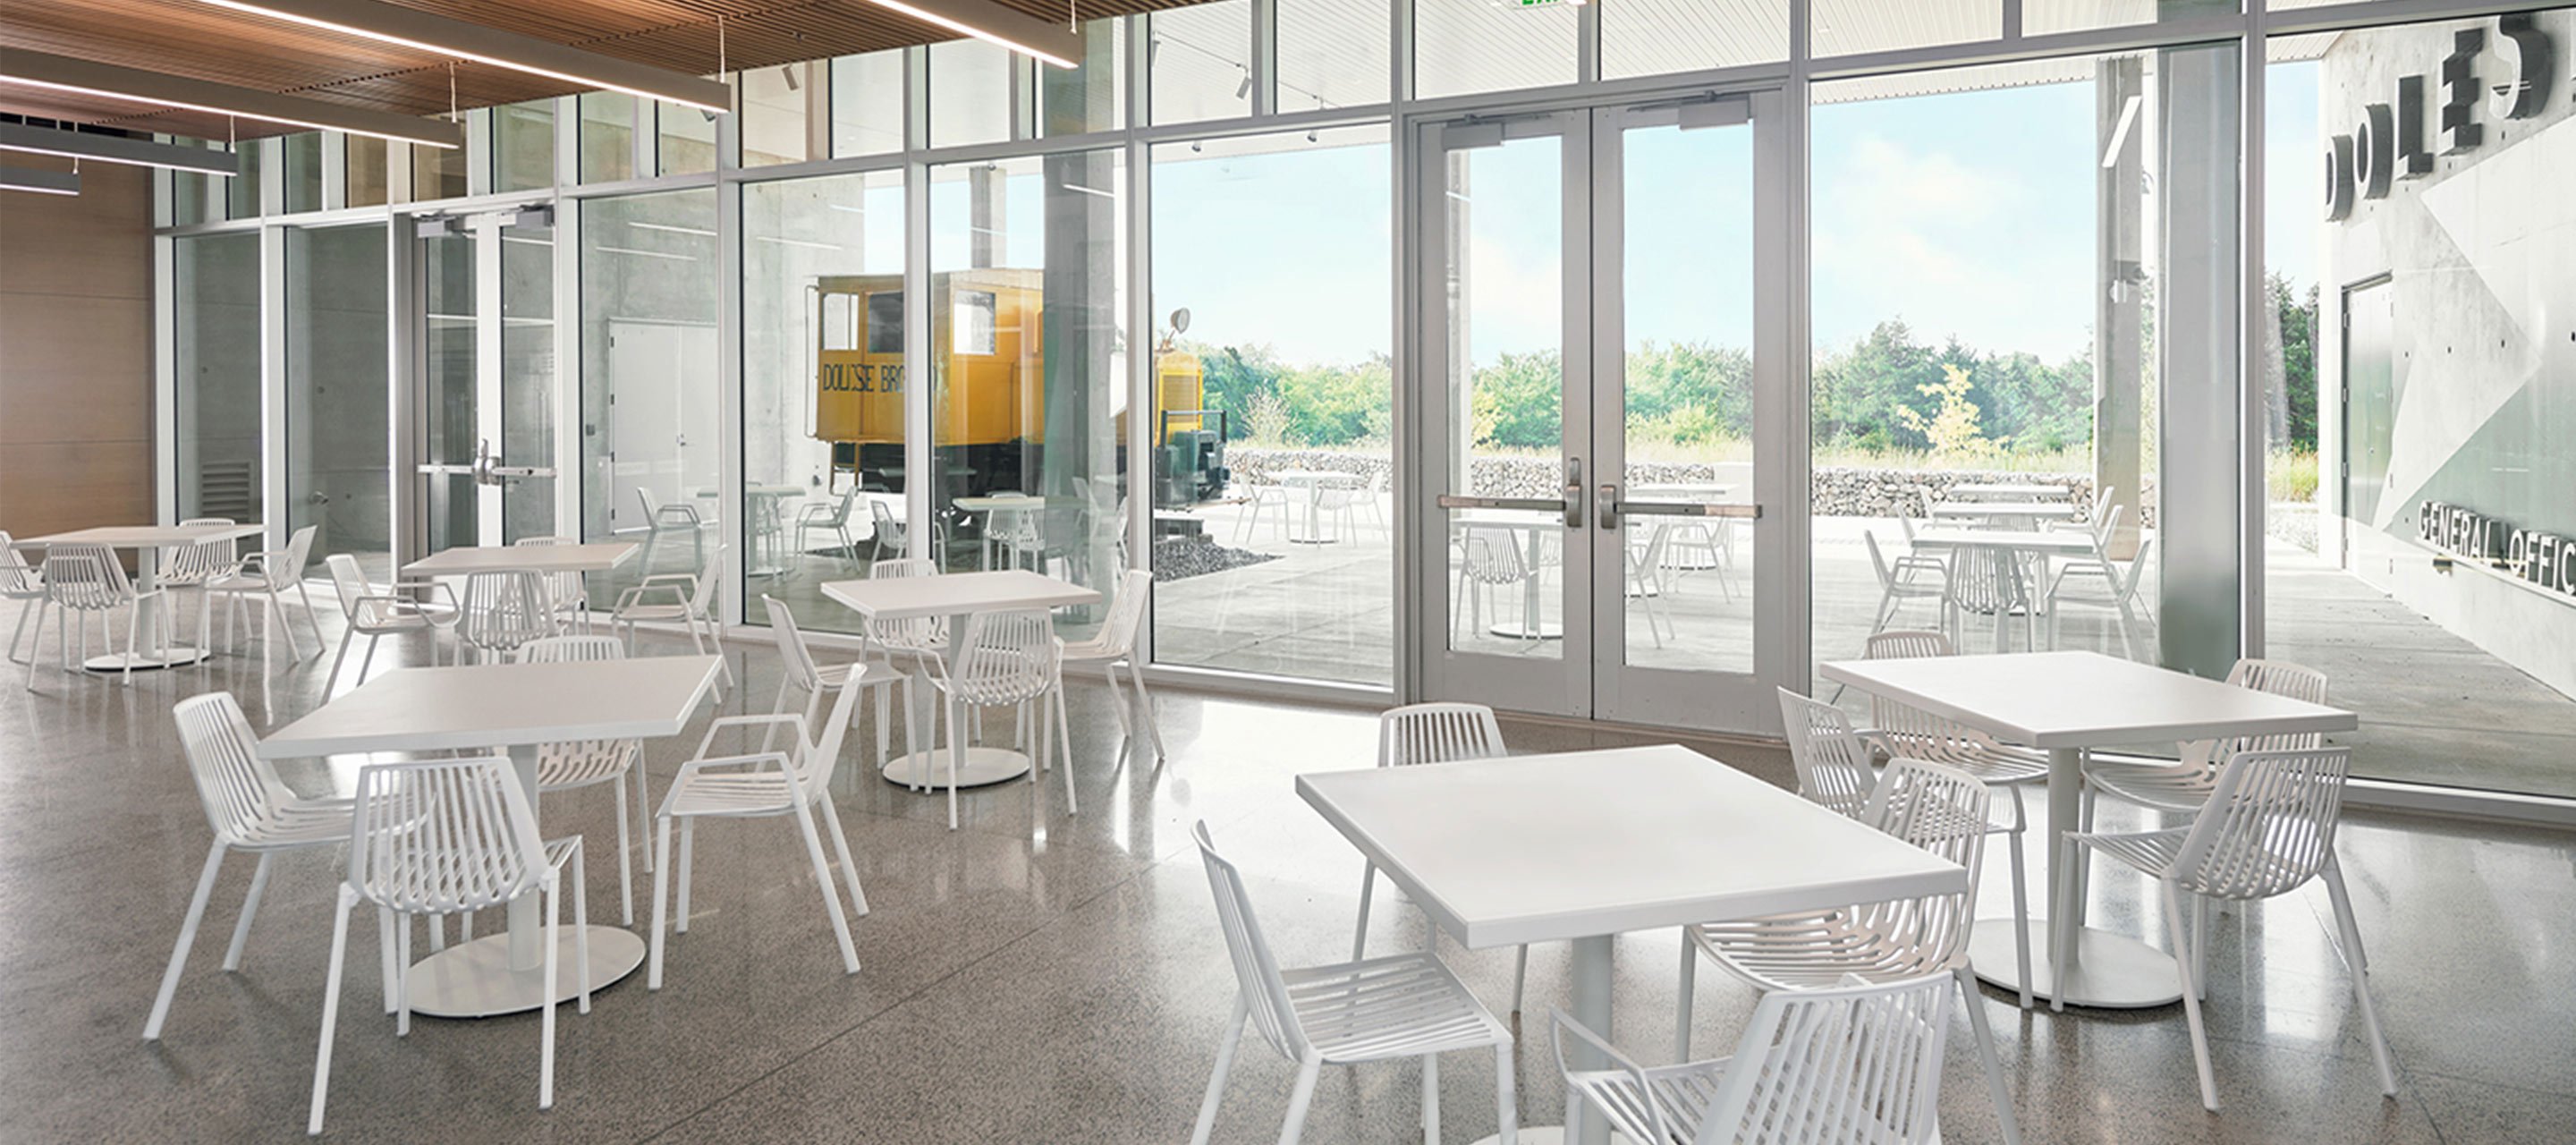 Haworth dining chairs in white in Dolese cafeteria